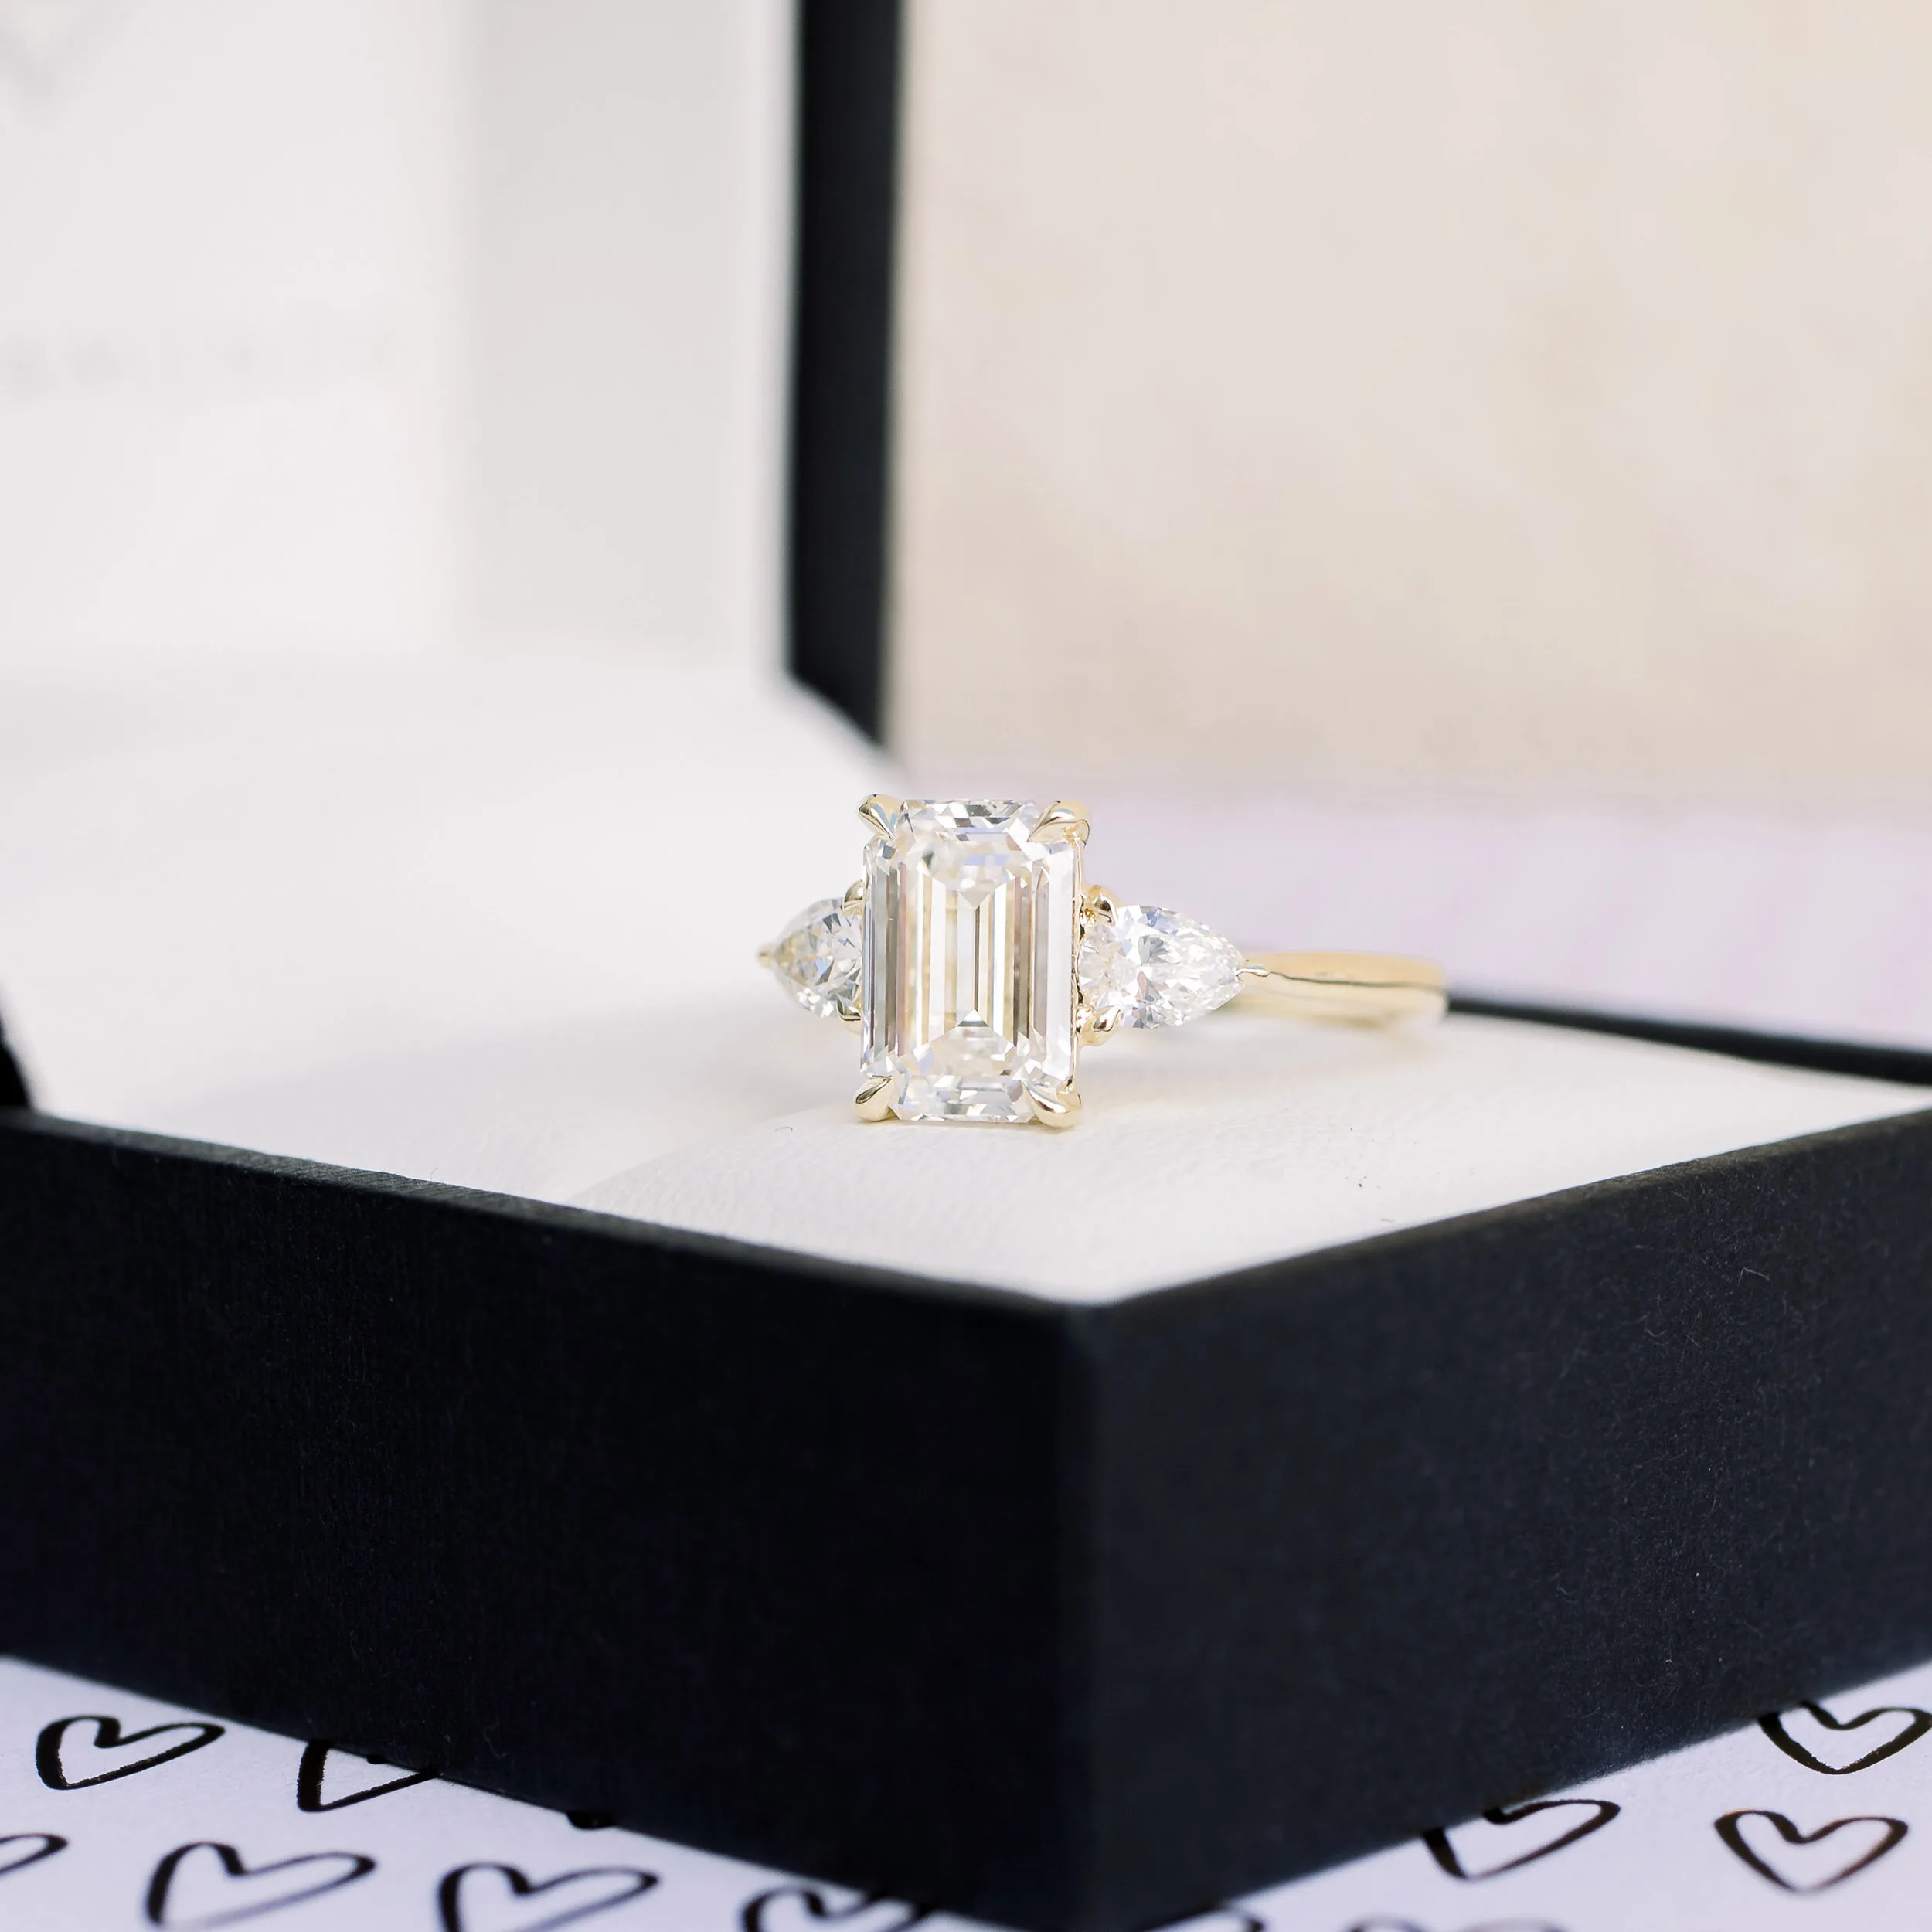 Yellow Gold Two Carat Emerald Cut Lab Diamond Engagement Ring with Pear Side Stones Ada Diamonds Design AD-467 in Black Box